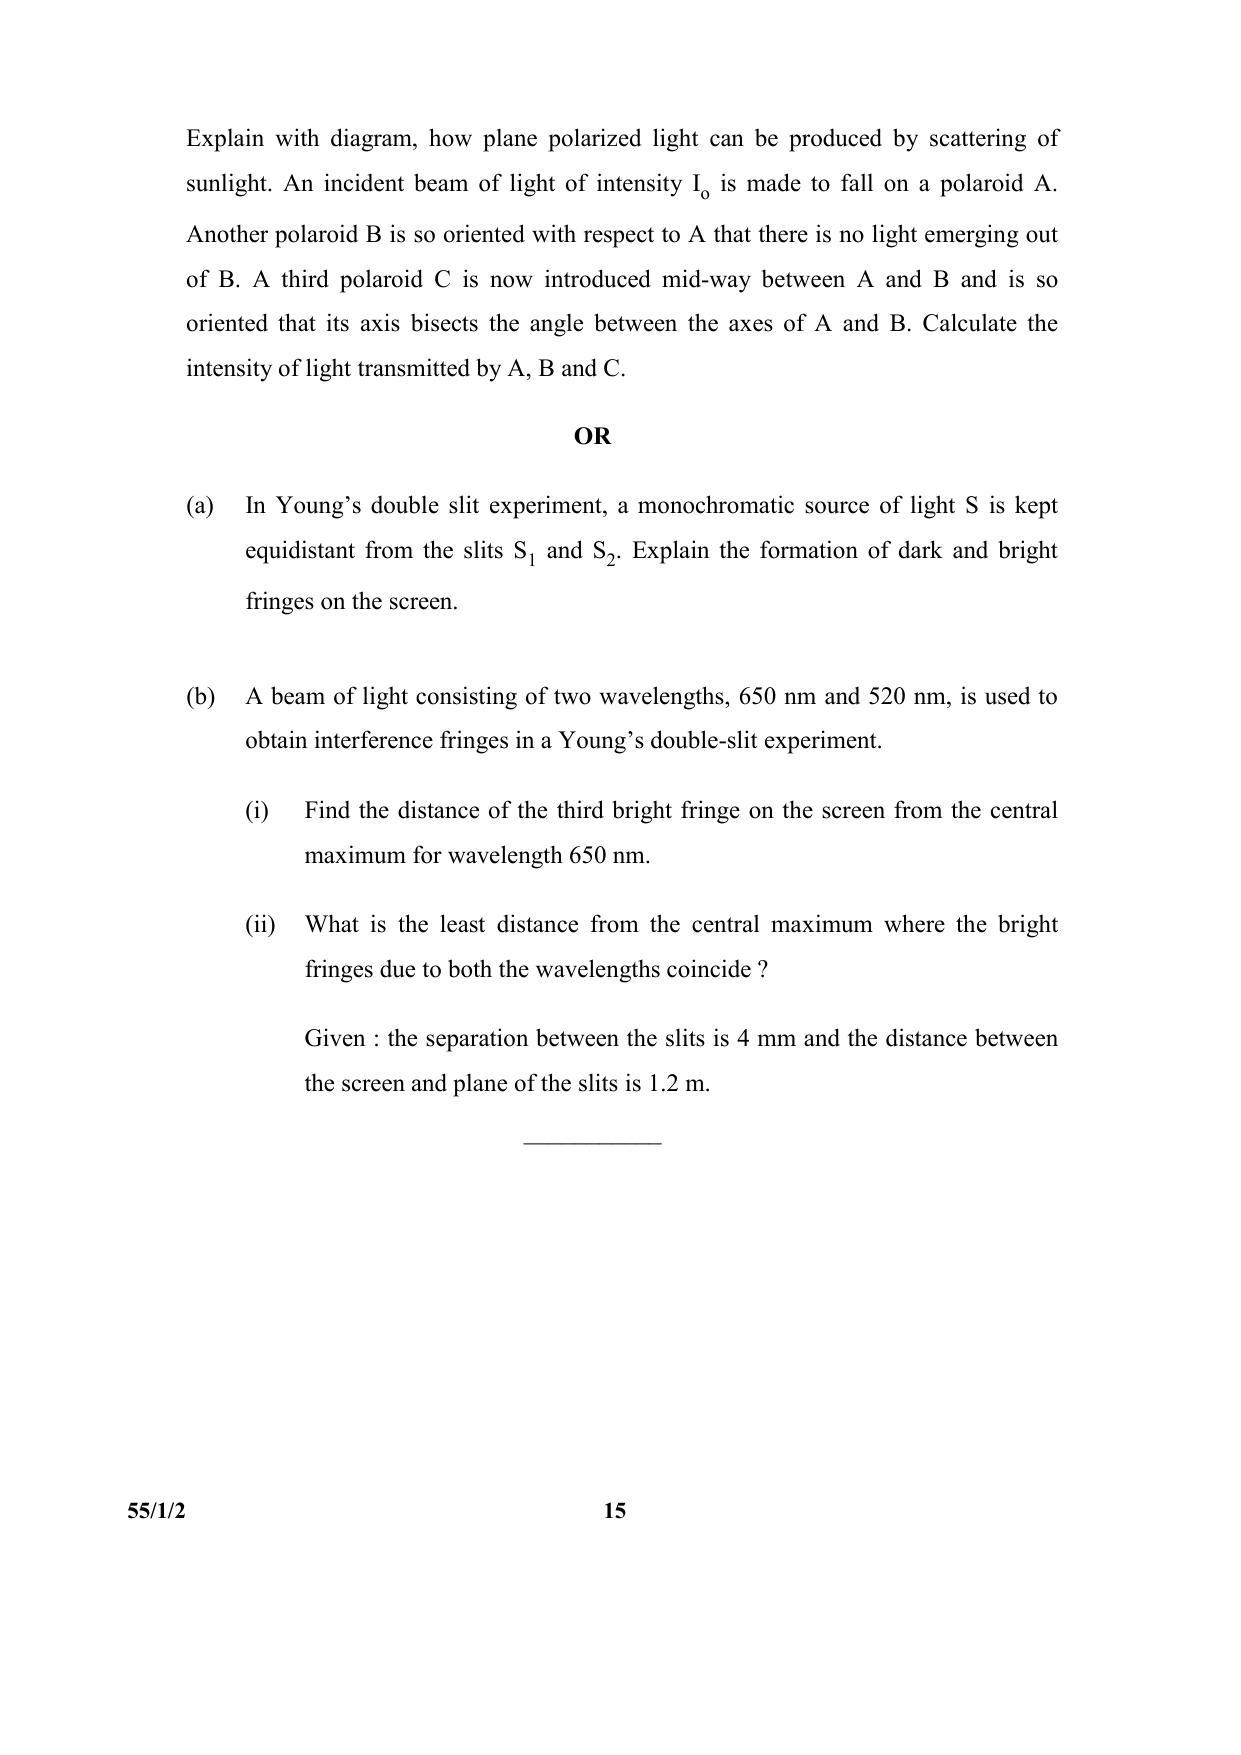 CBSE Class 12 55-1-2 (Physics) 2017-comptt Question Paper - Page 15